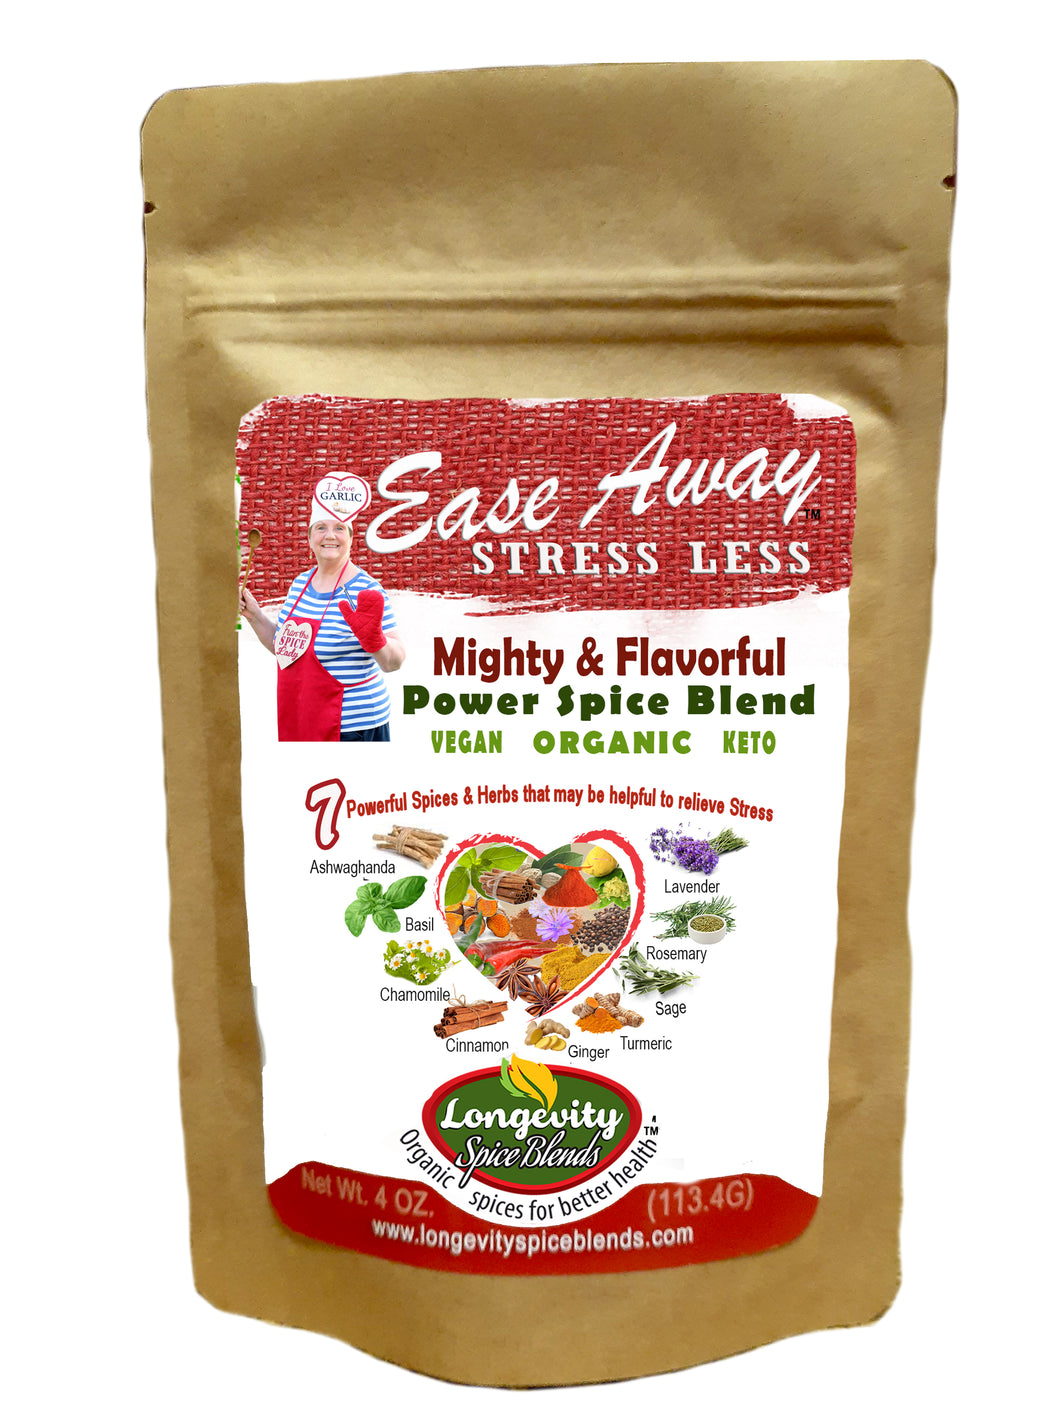 Stress Relief Spice & Herb Blend: EaseAway, Stress Less - Naturally Relieve Stress with our Soothing Ingredients